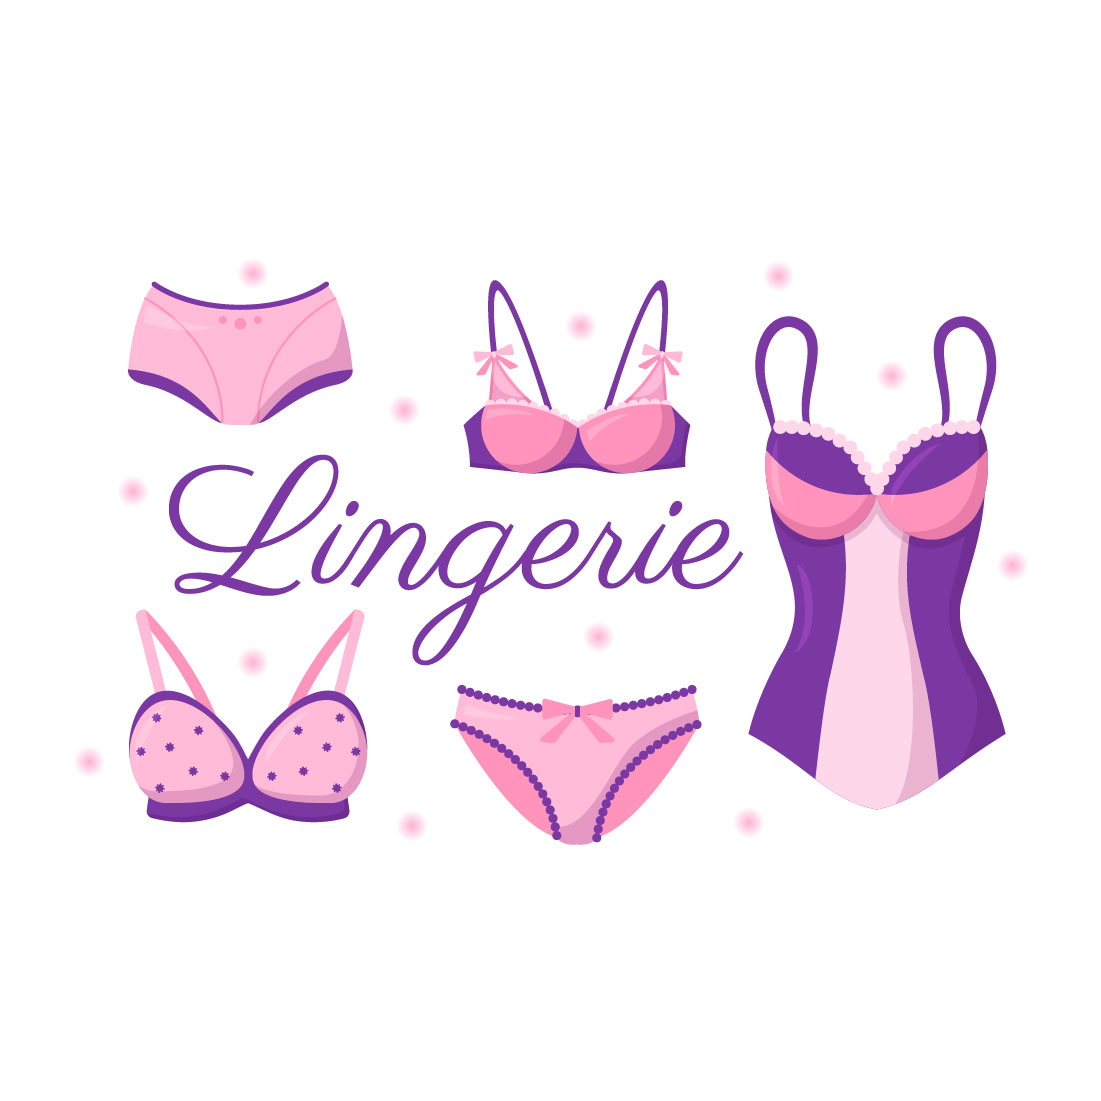 Set of irresistible cartoon images of lingerie.